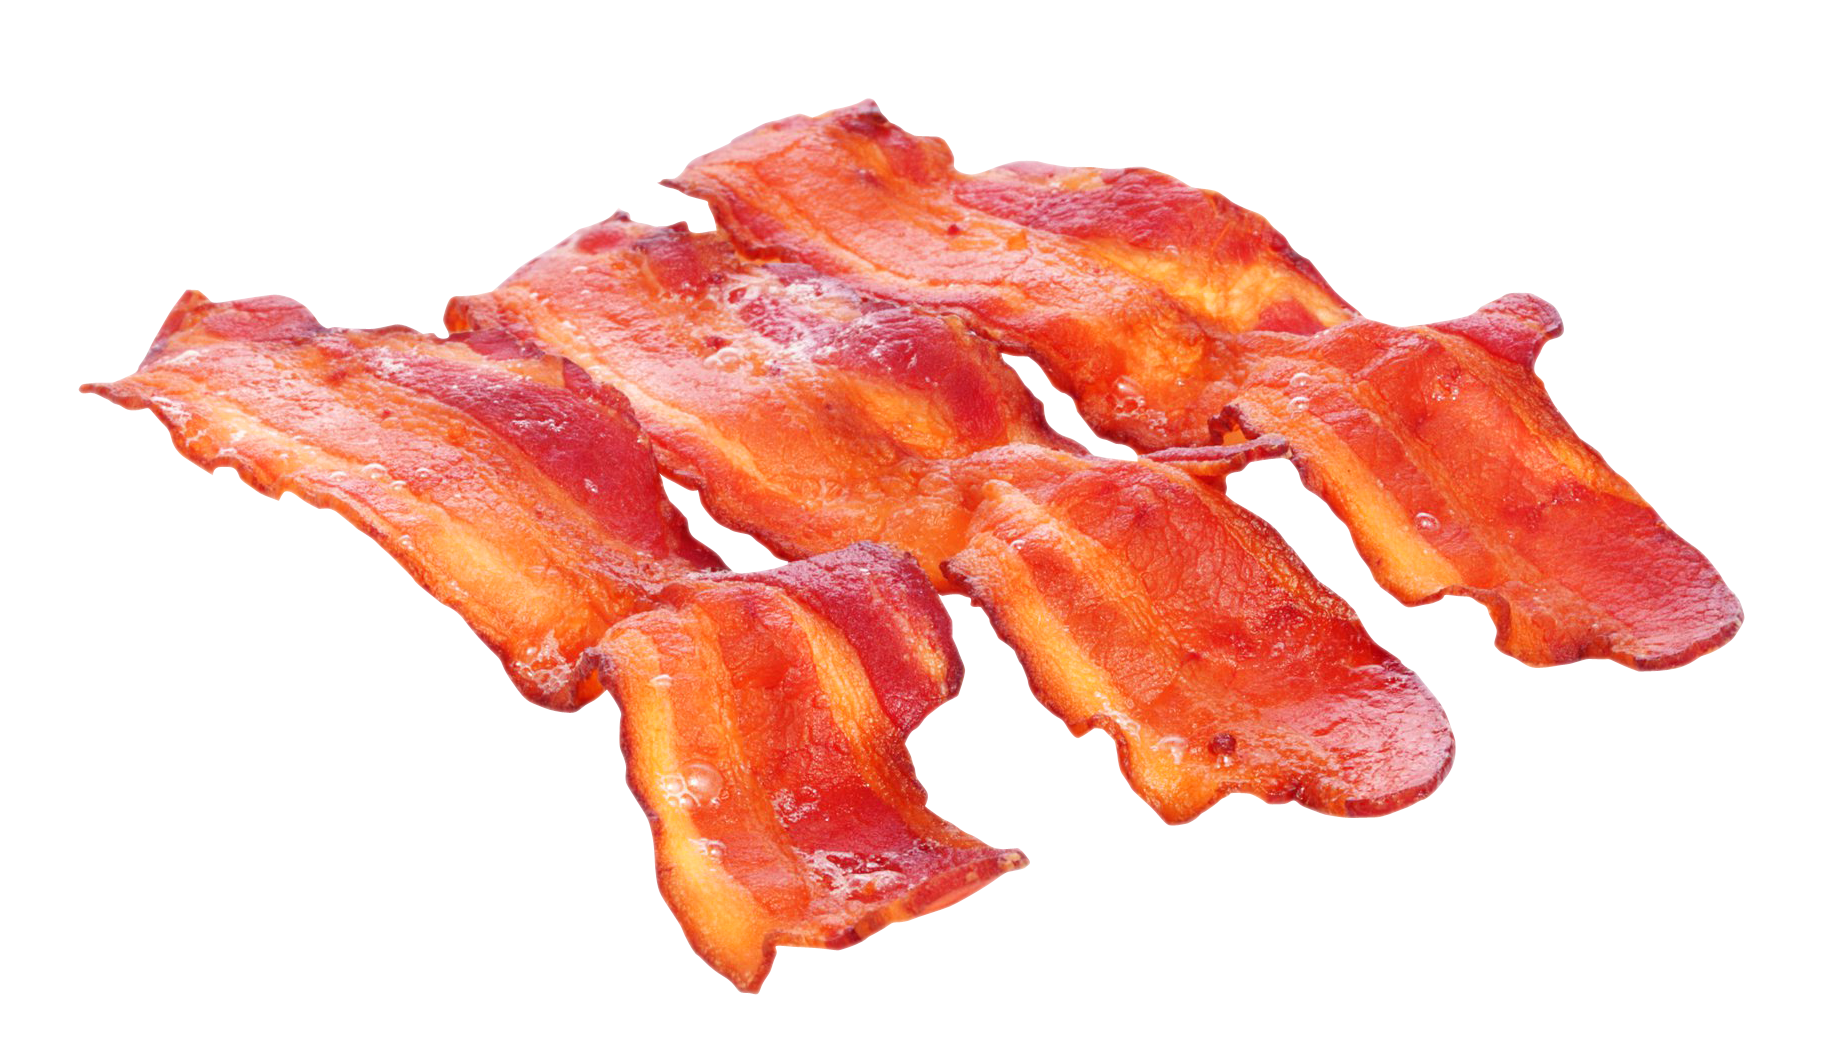 A Group Of Bacon Strips